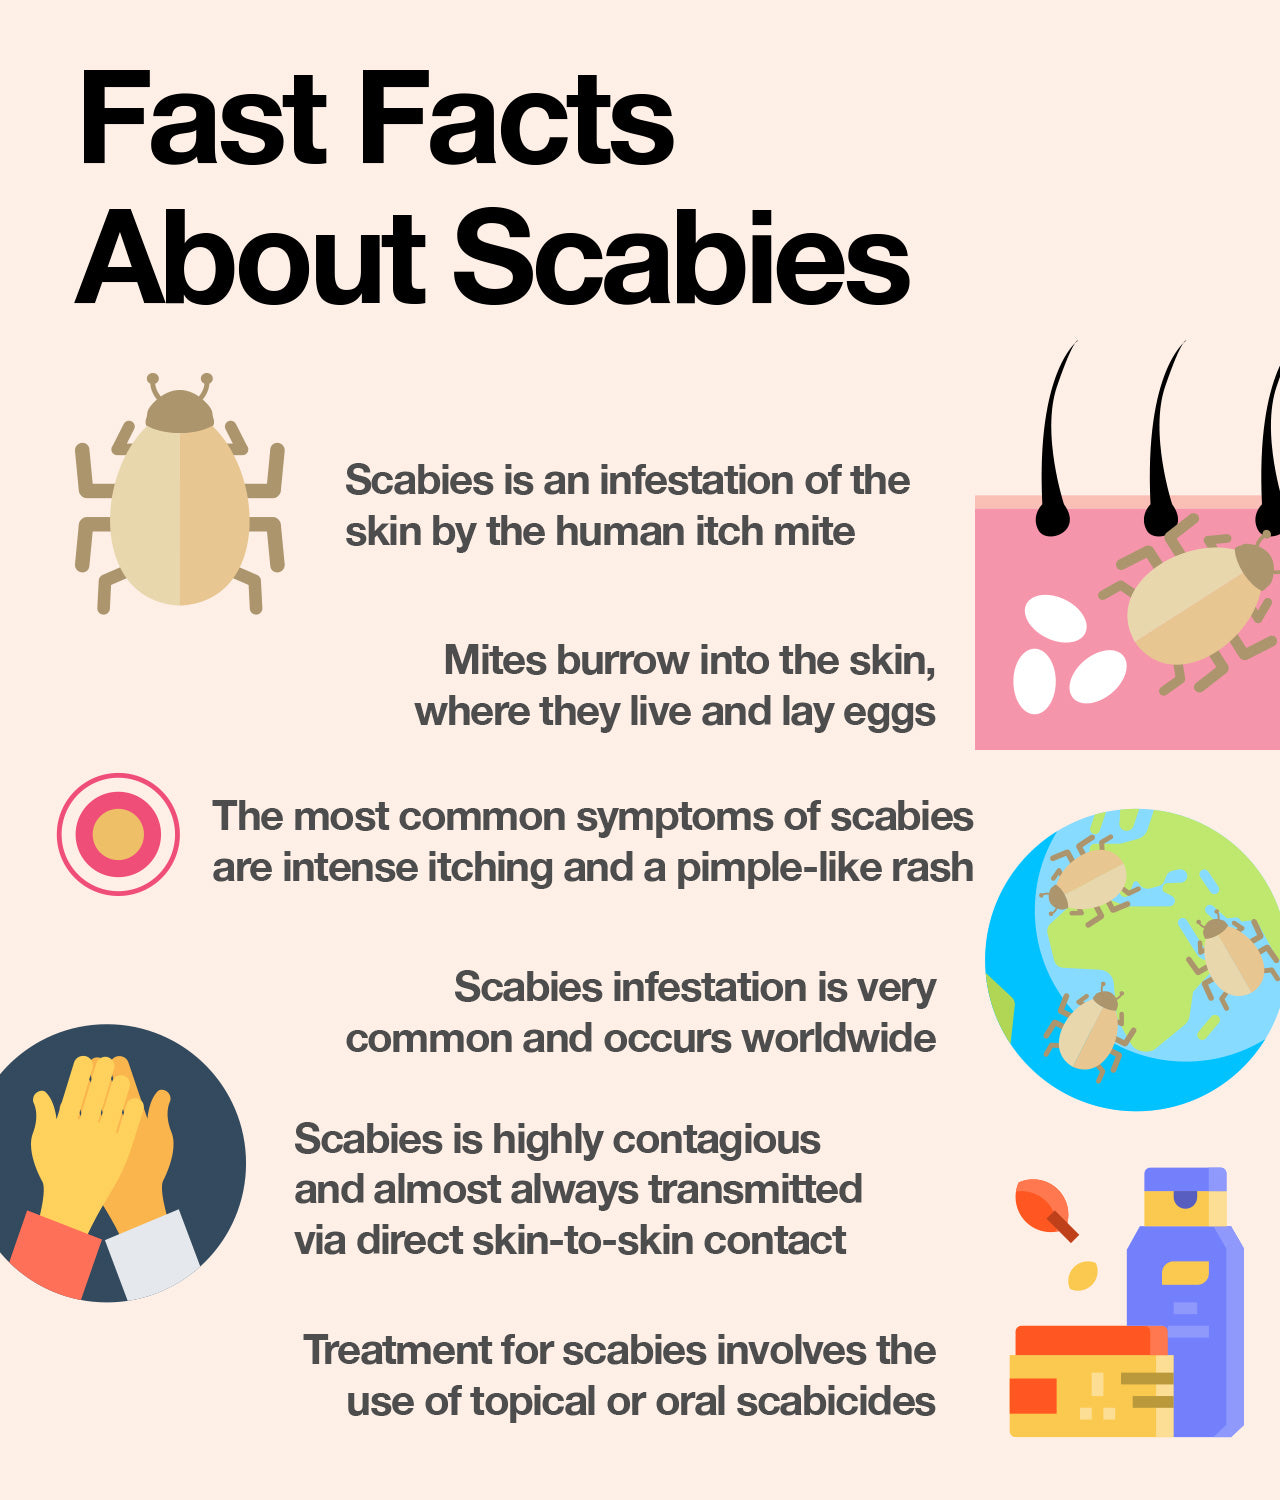 Learn how to treat scabies.